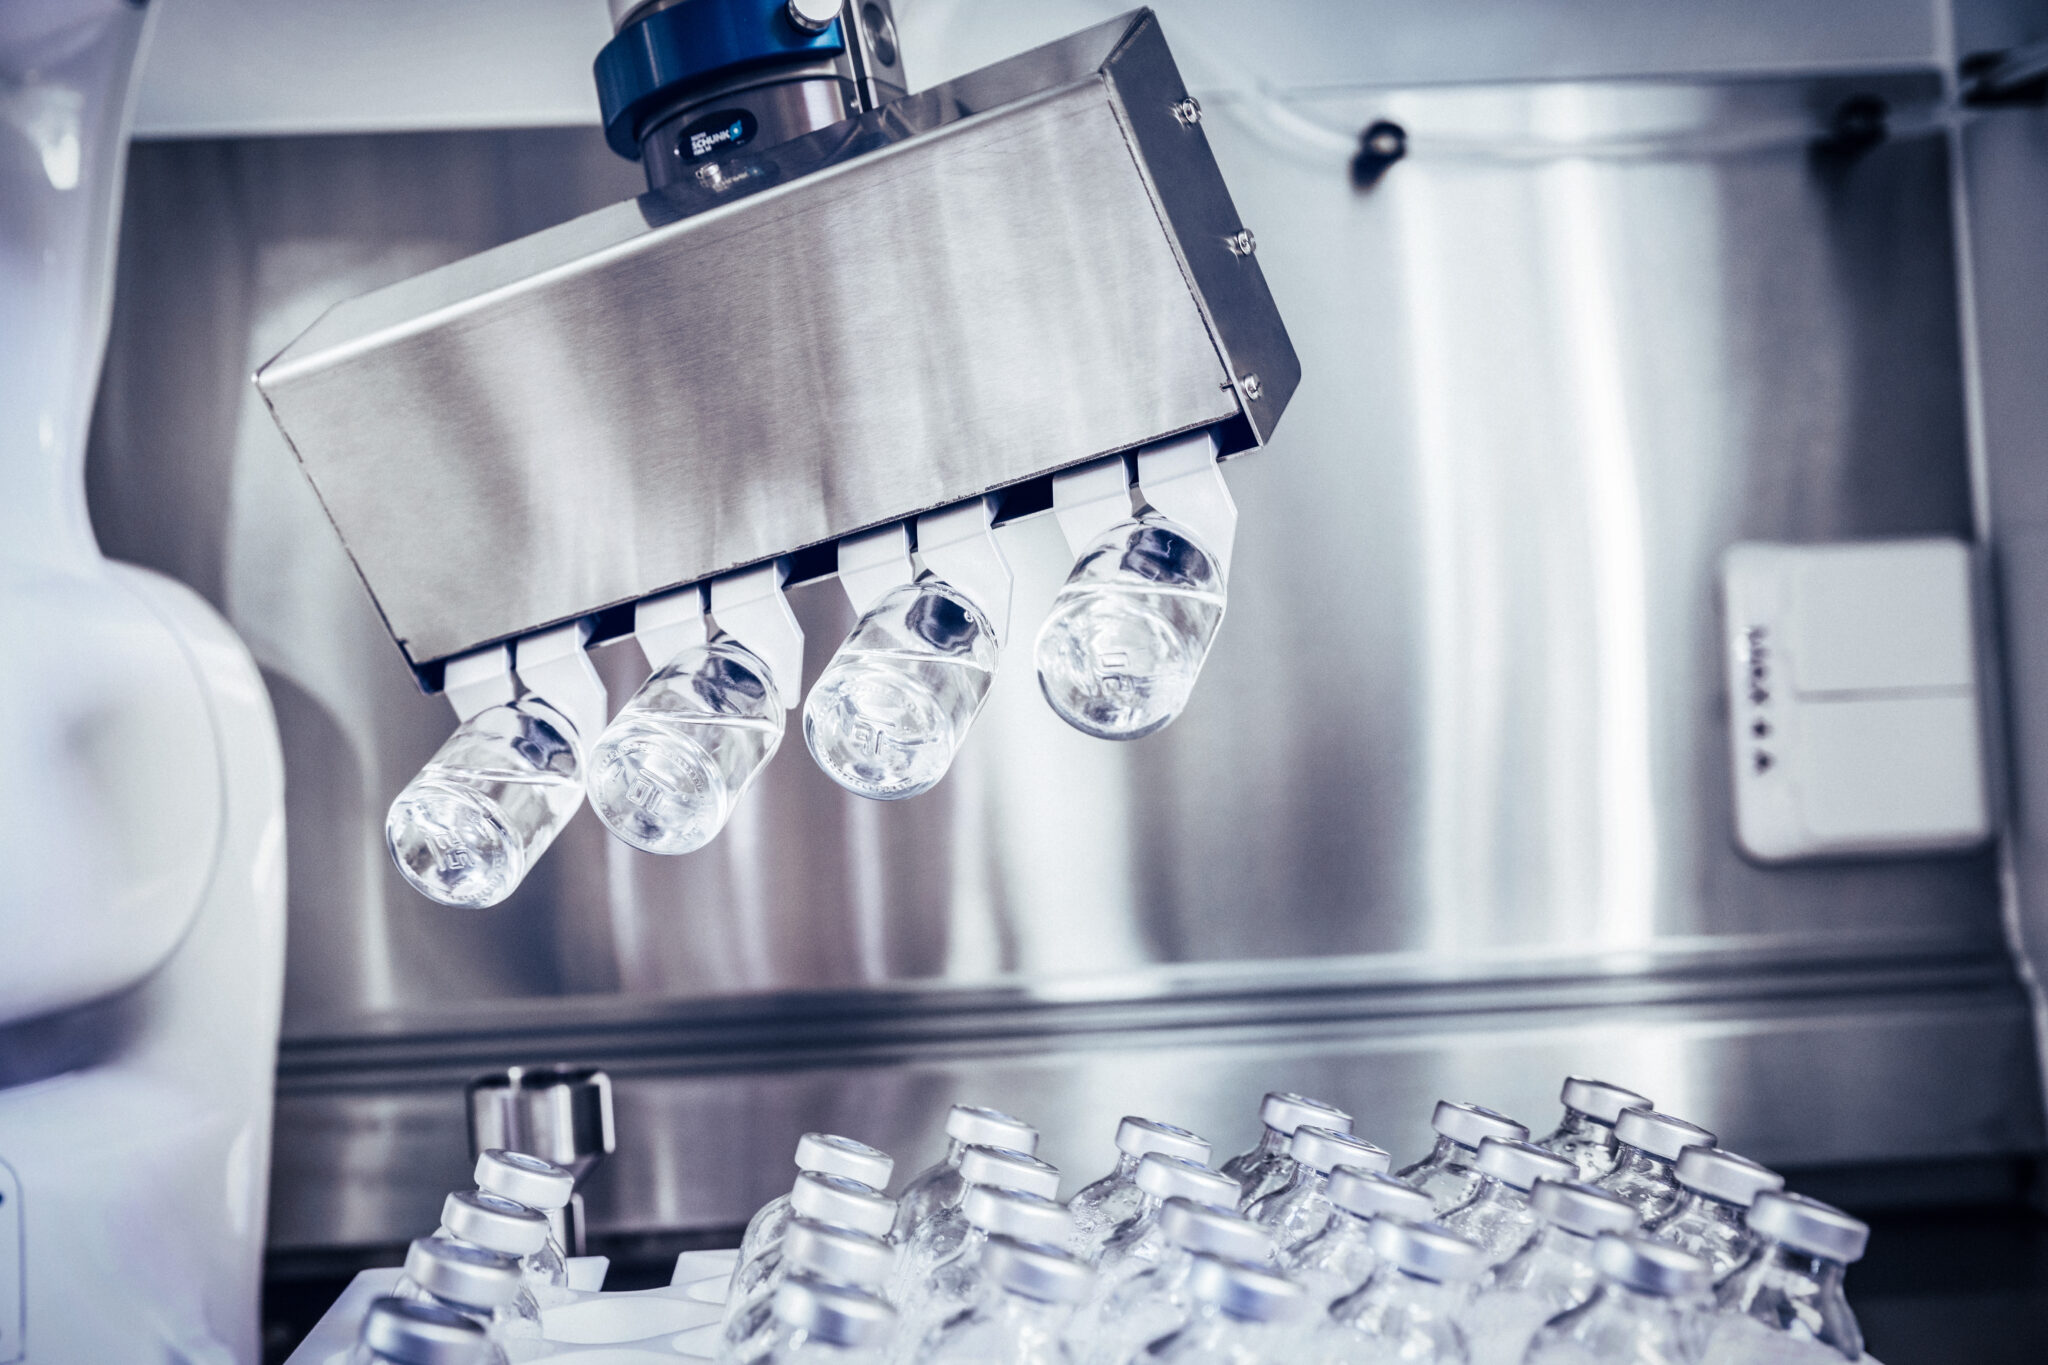 Improve the safety and efficiency of antibiotic compounding by fully automating the reconstitution process